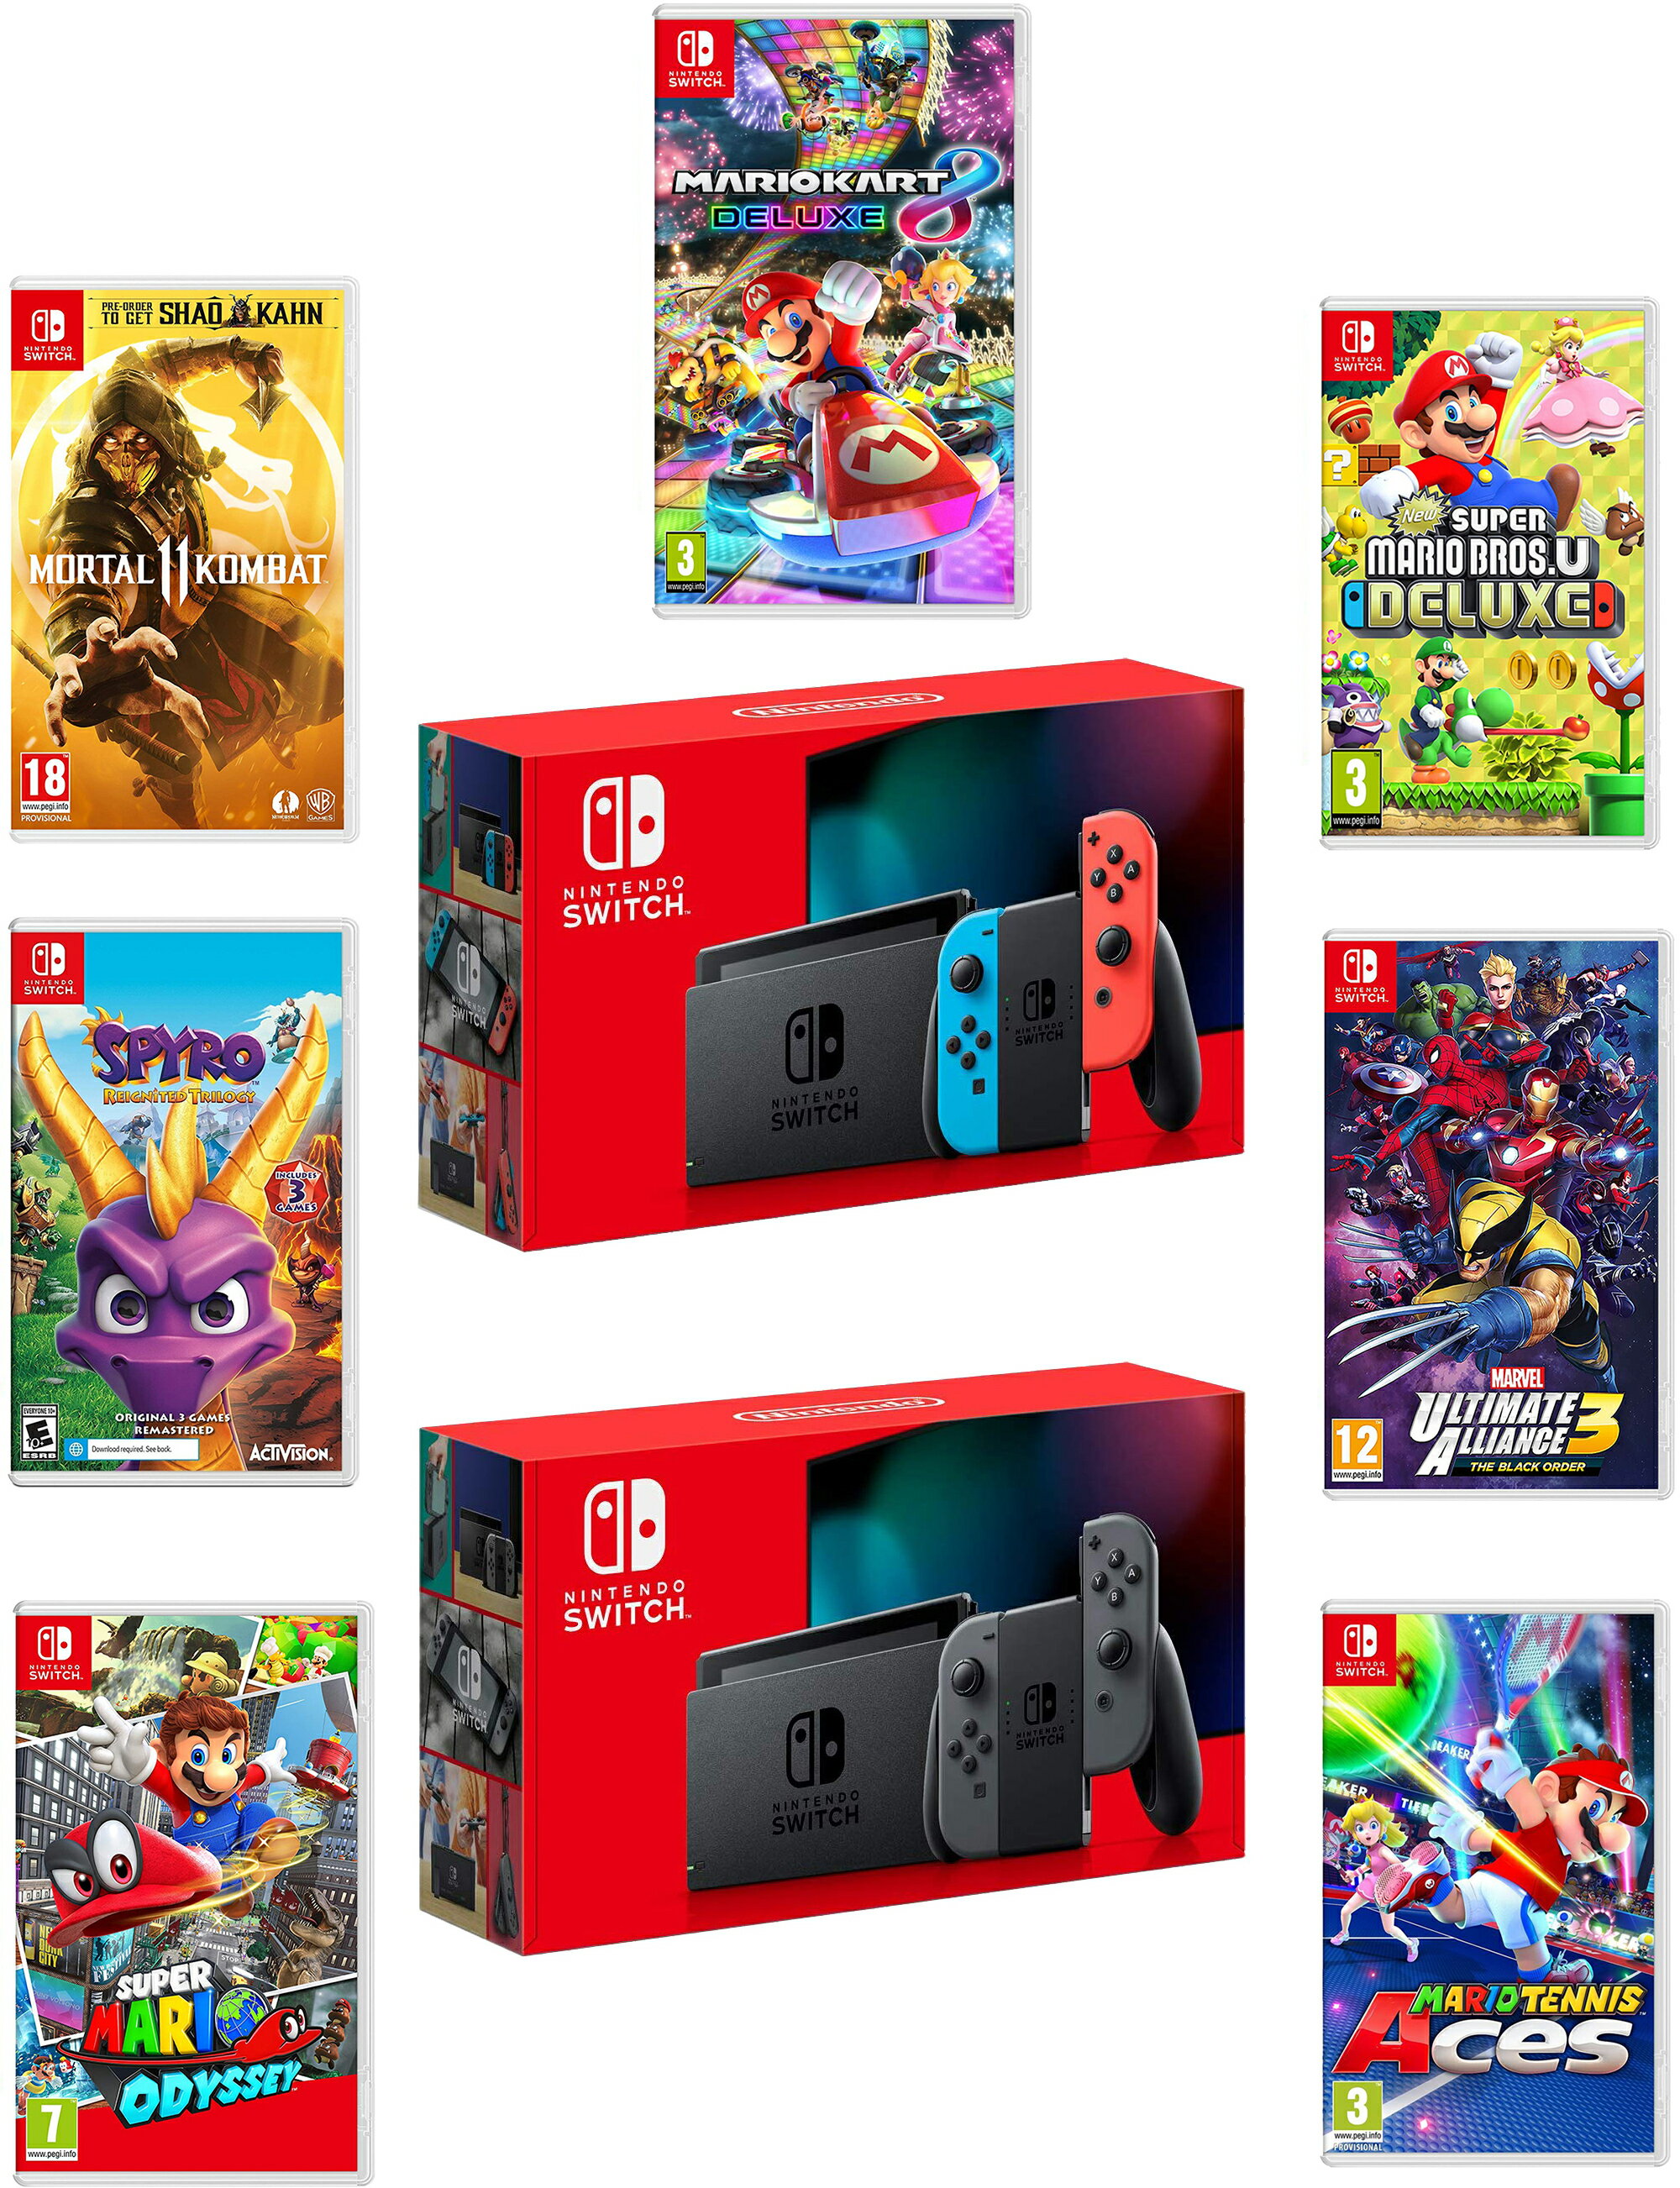 nintendo switch exclusive games 2019